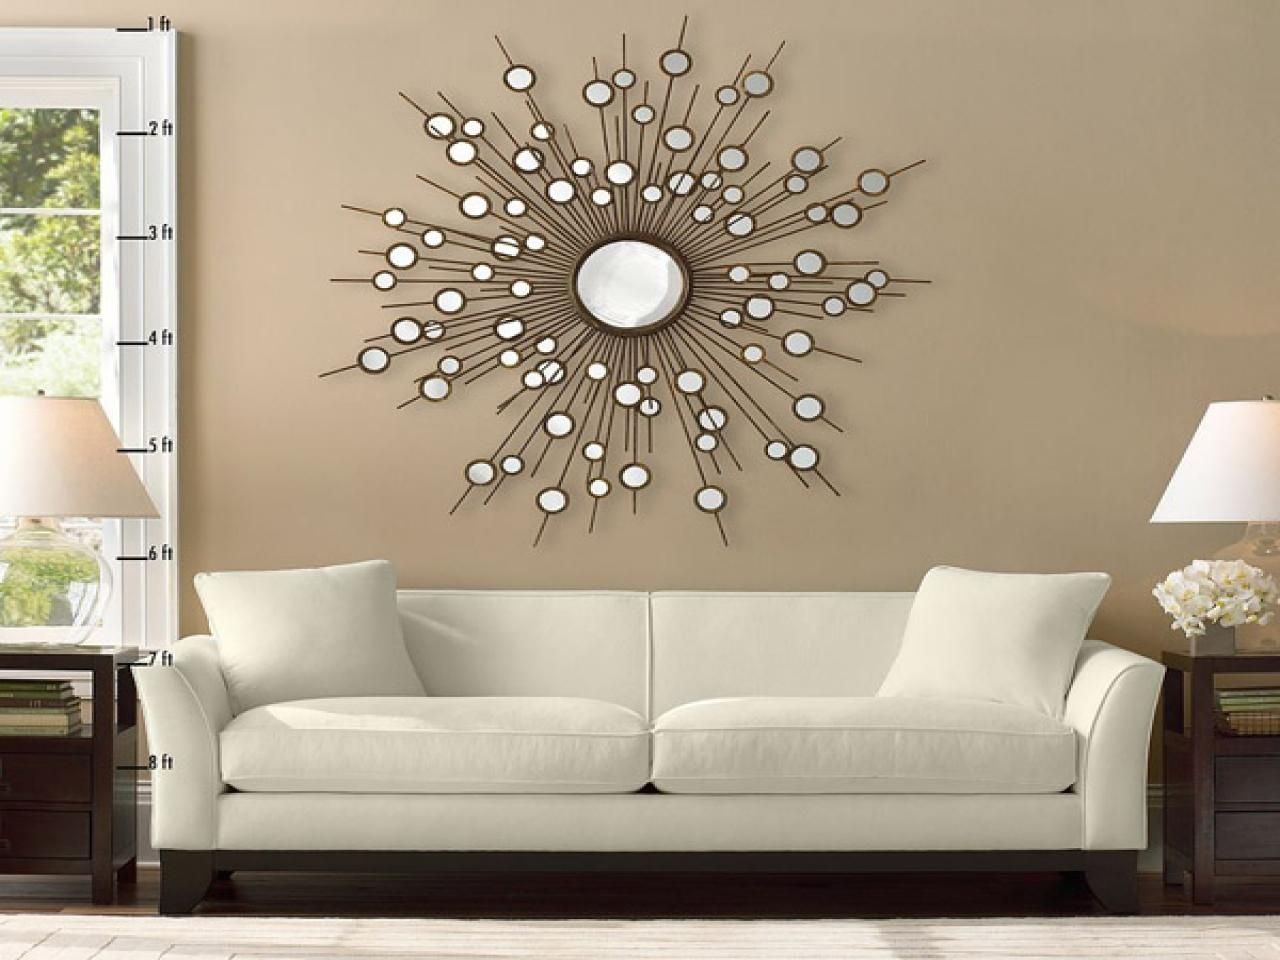 Decorative Wall Mirrors For Any Space Throughout Mirror Decor Regarding Mirrors Decoration On The Wall (View 11 of 20)